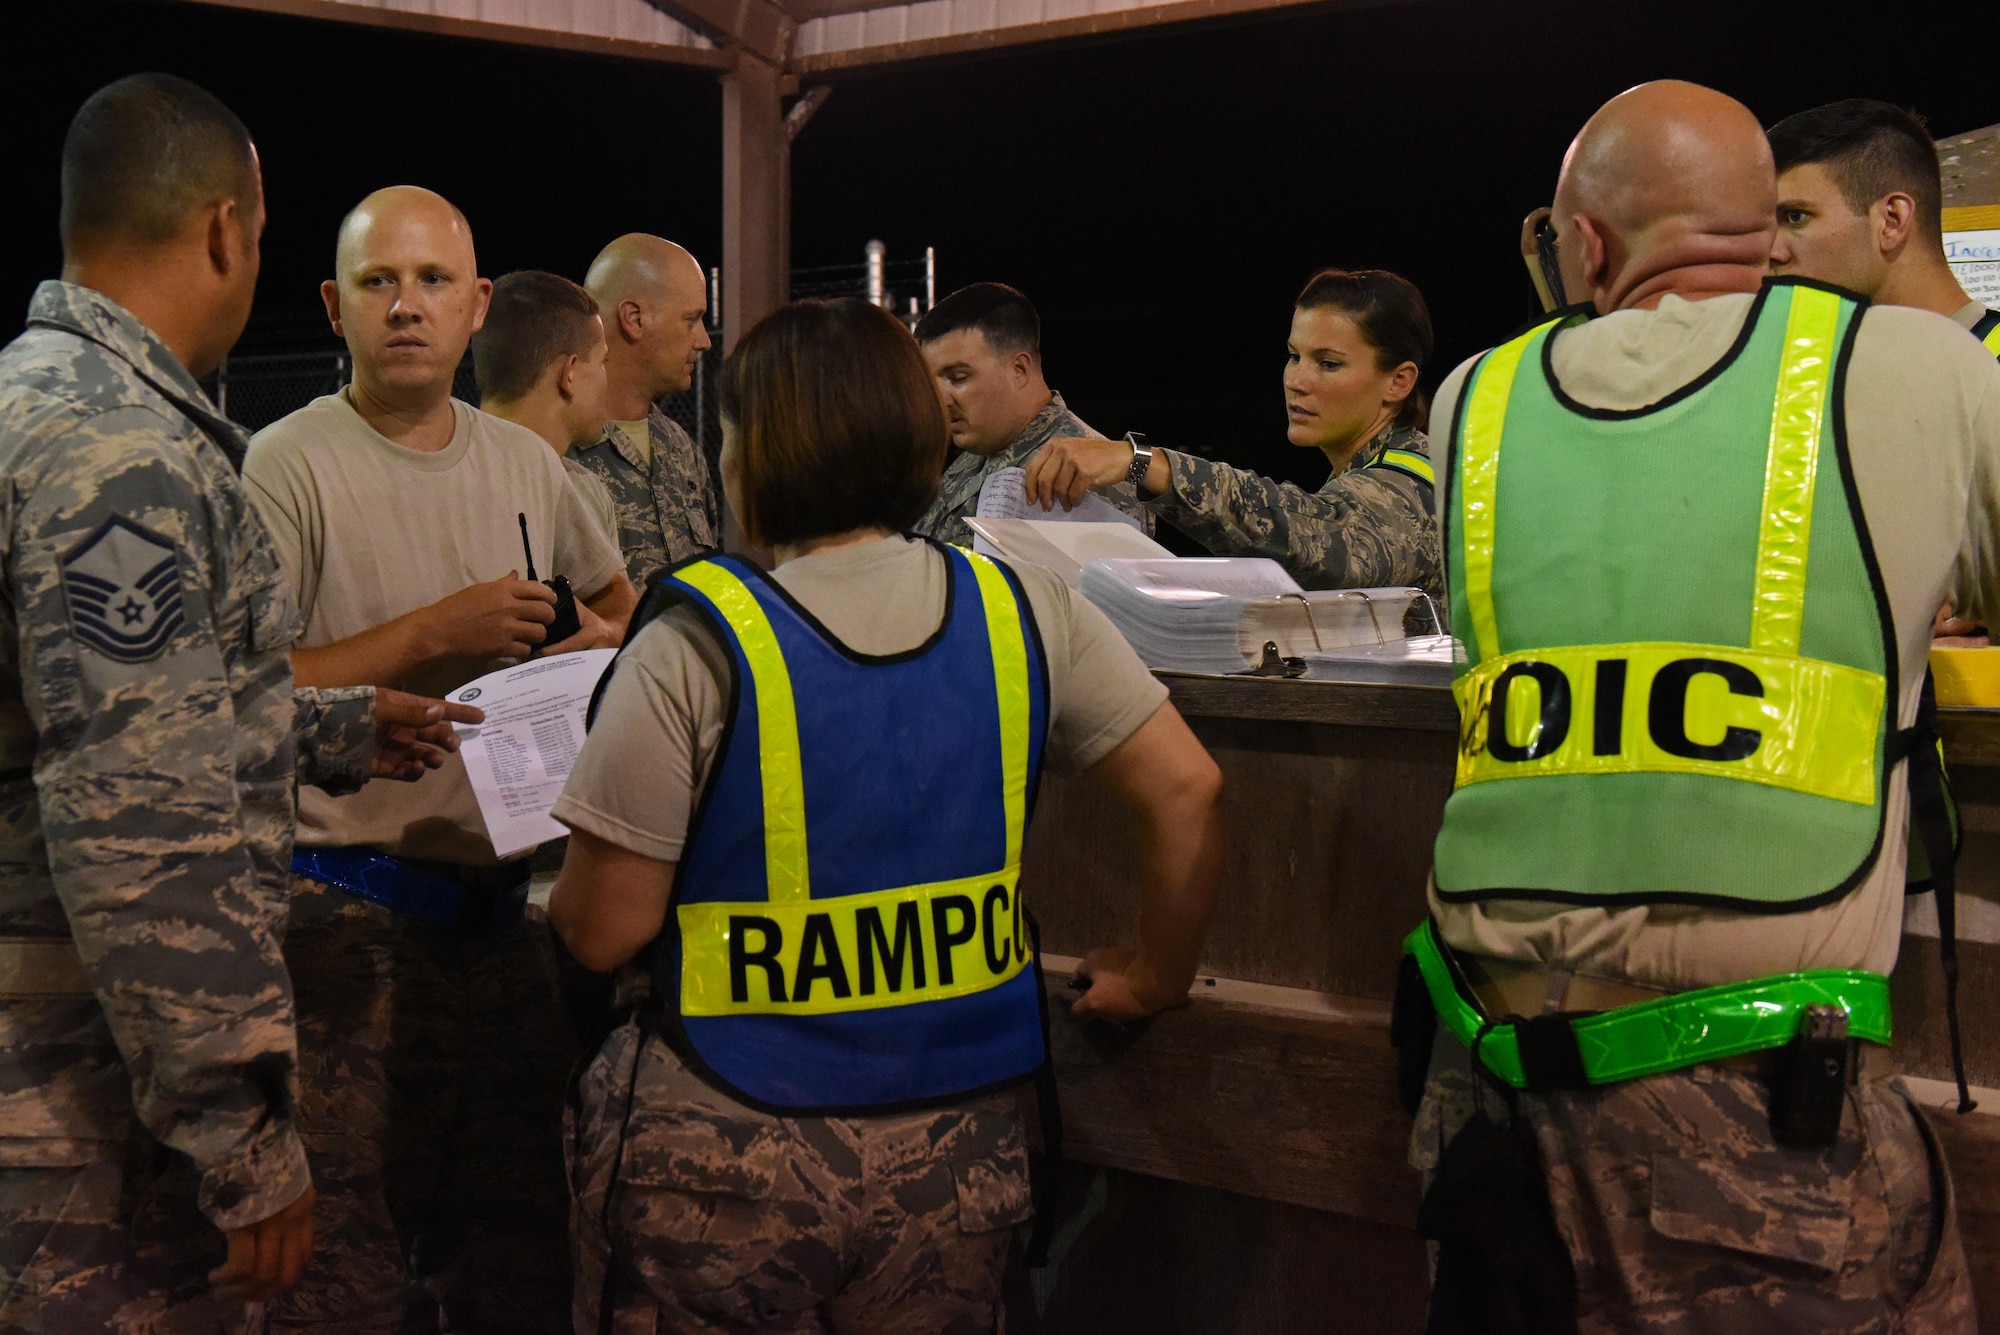 Participants of Exercise Thunderdome 17-02 review, log and analyze cargo and equipment, July 20, 2017, at Seymour Johnson Air Force Base, North Carolina. The exercise allowed members of the 4th Fighter Wing to make improvements and strengthen skills in the event of a real-world short notice deployment tasking. (U.S. Air Force photo by Senior Airman Ashley Maldonado)